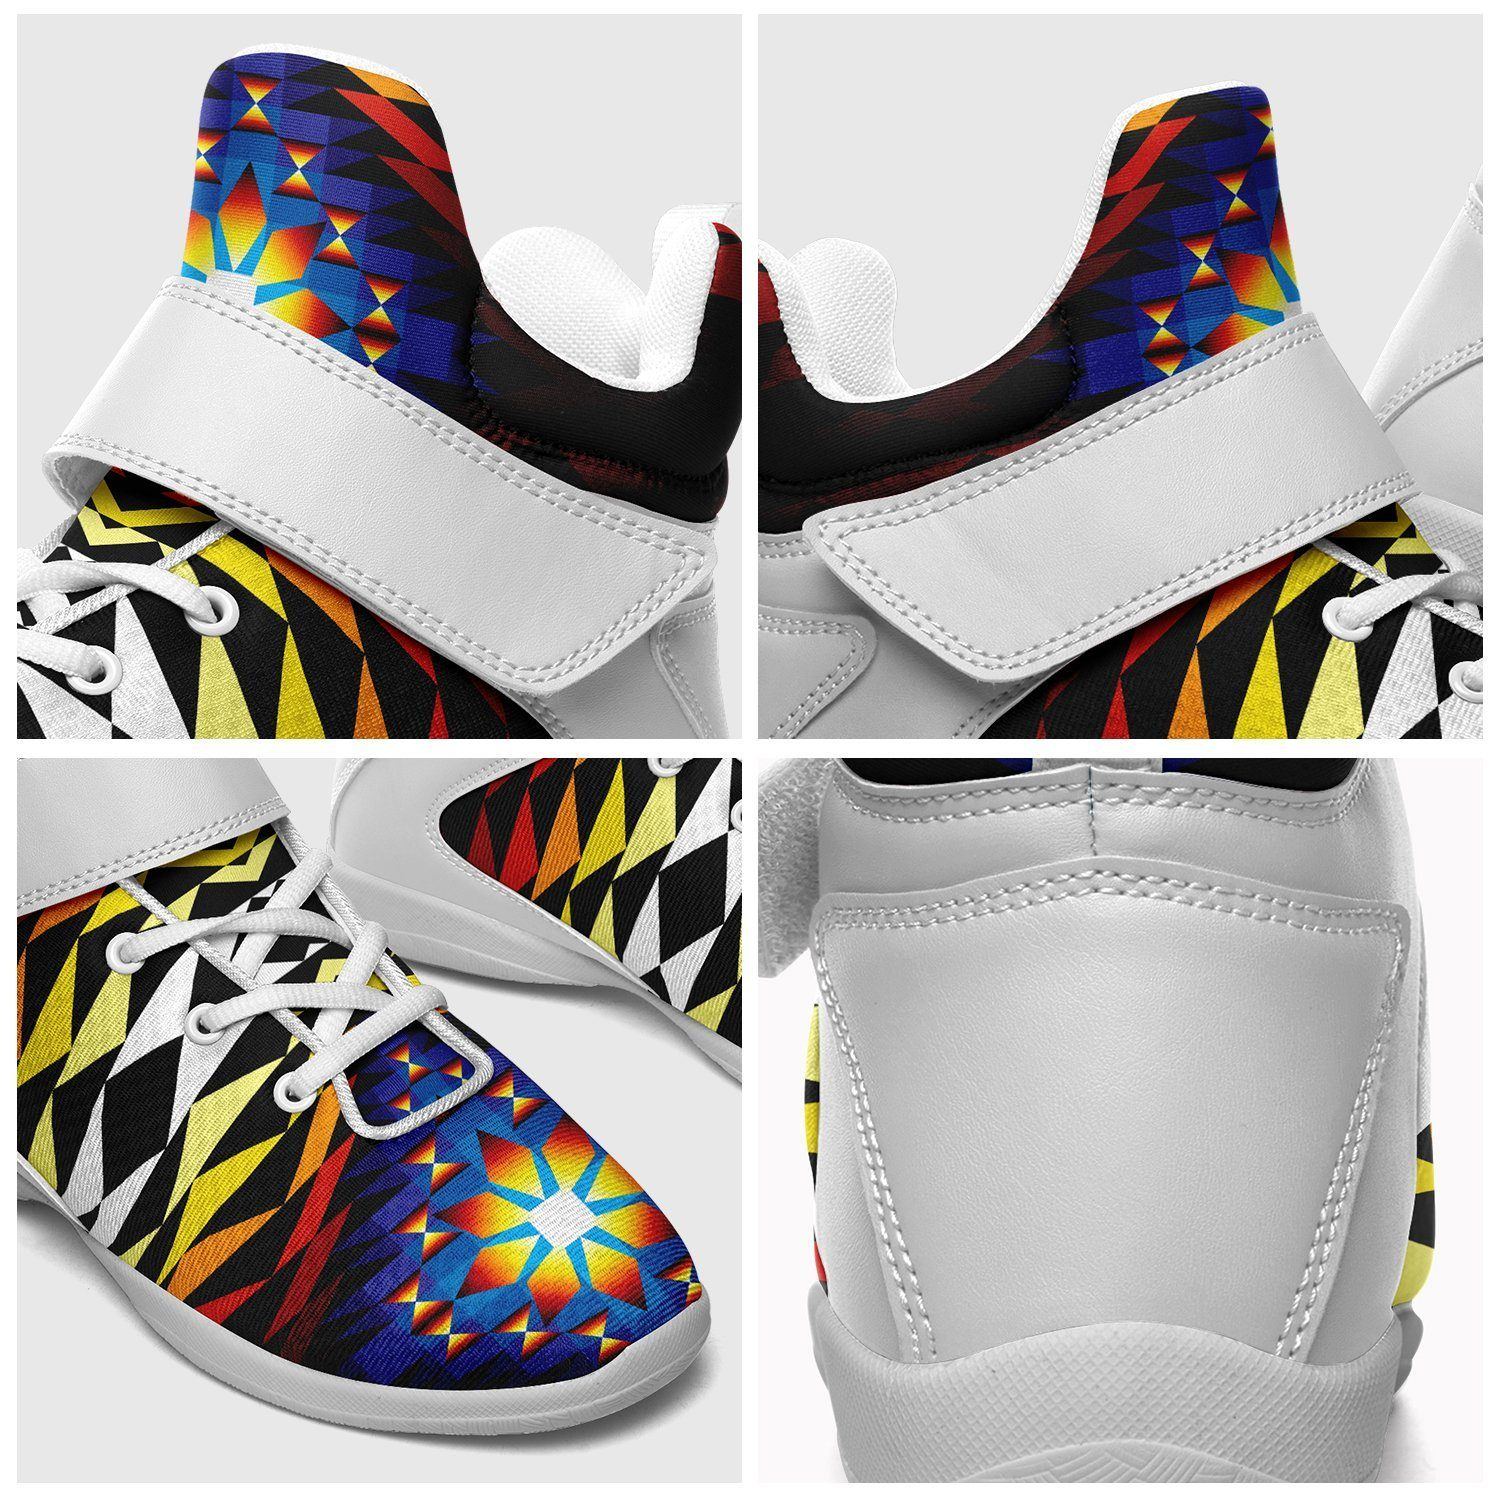 Sunset Blanket Ipottaa Basketball / Sport High Top Shoes - White Sole 49 Dzine 